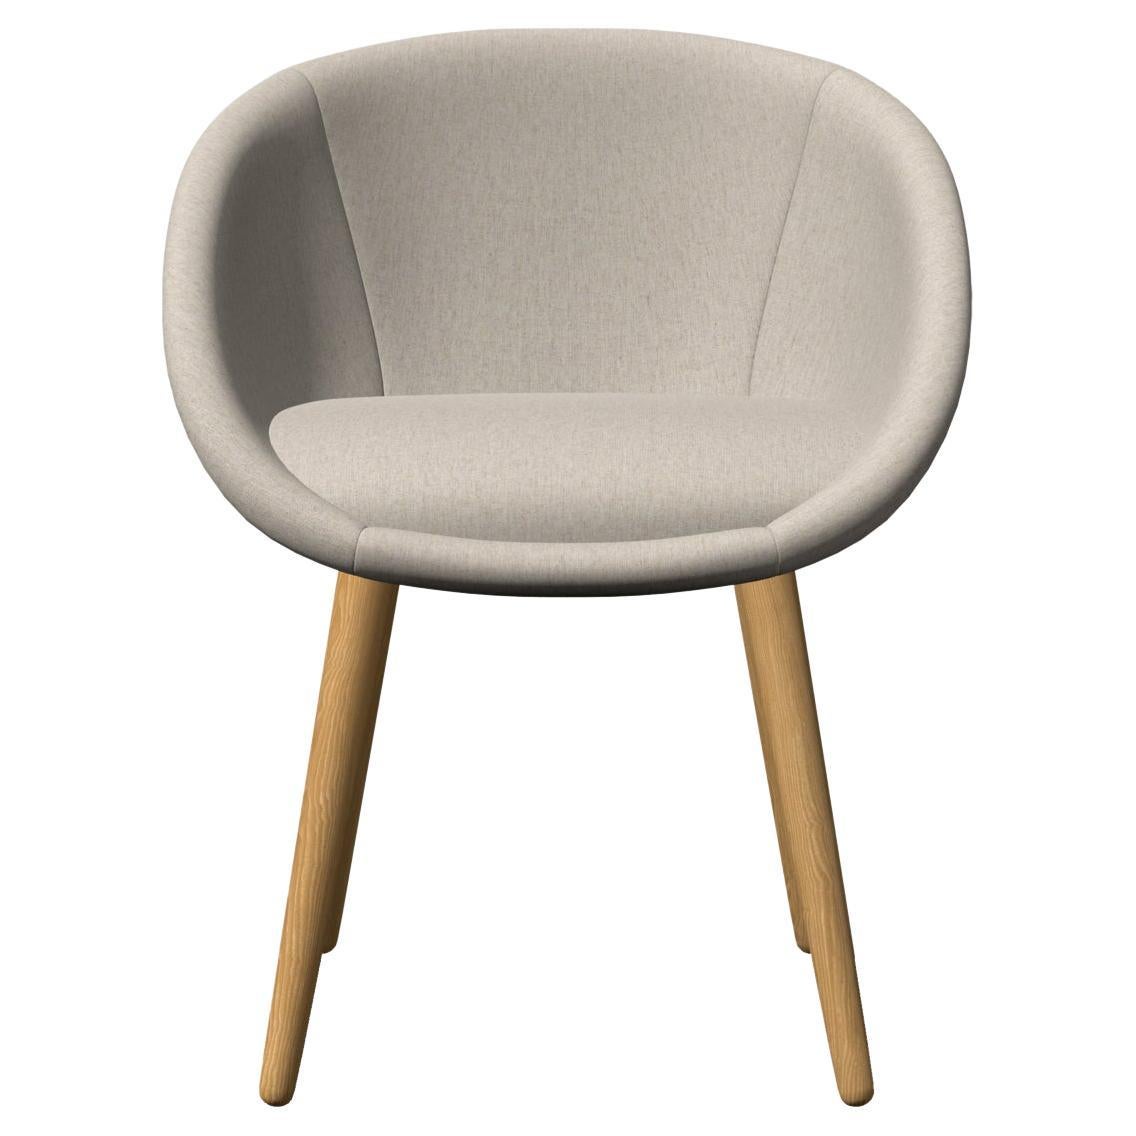 Moooi Love Dining Chair in Divina MD, 213 Beige Upholstery & White Wash Oak Legs For Sale